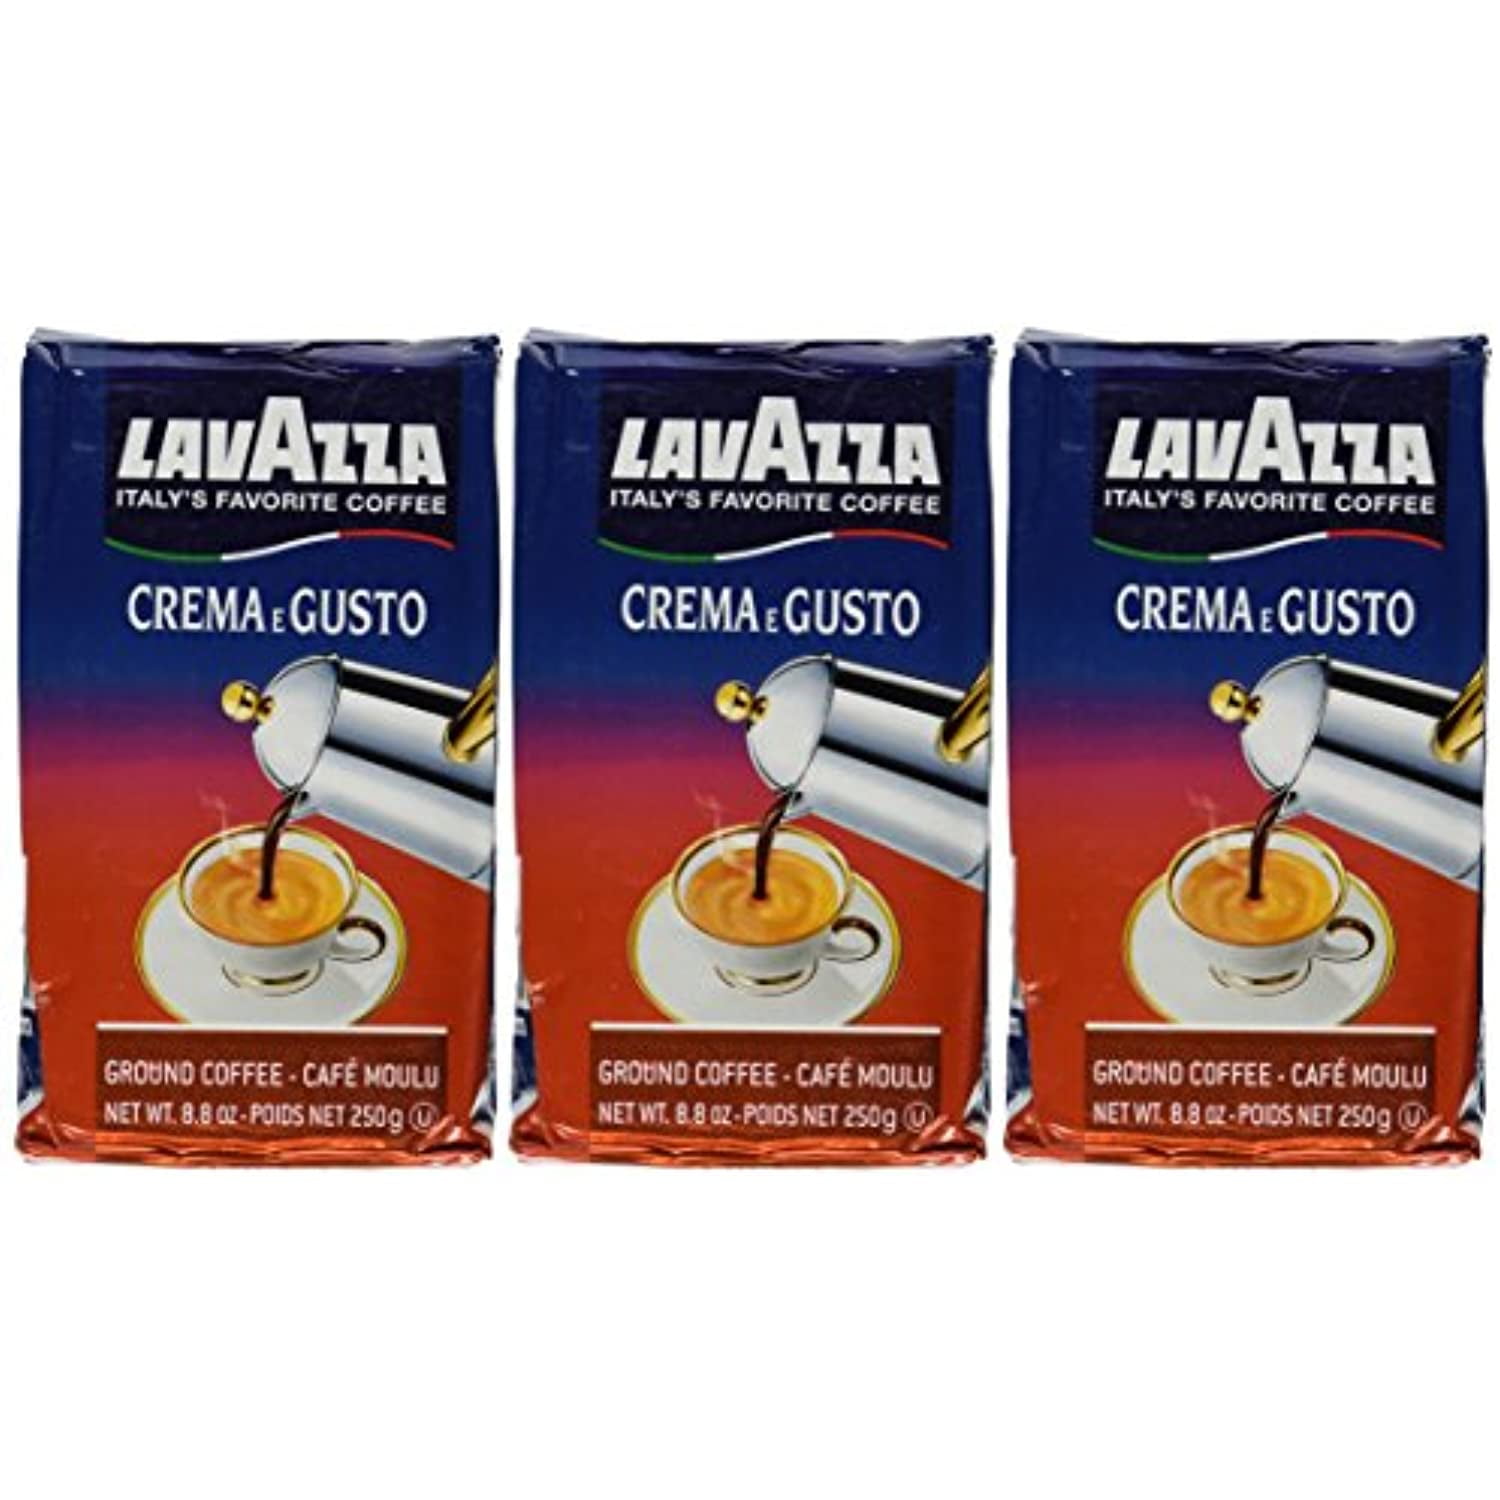 66 Lavazza Crema E Gusto Images, Stock Photos, 3D objects, & Vectors